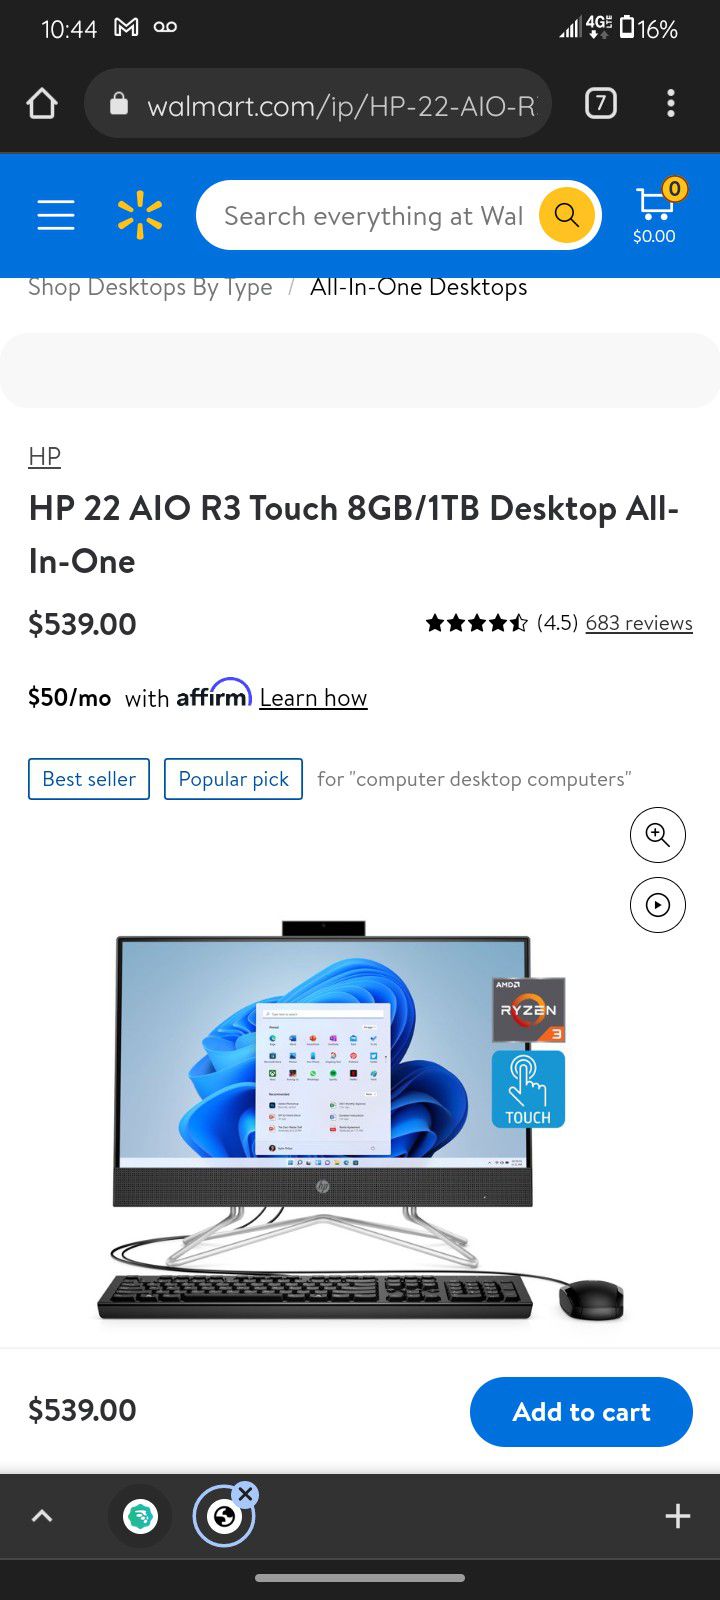 HP 22 AIO R3 Touch 8GB/1TB Desktop All-In-One

